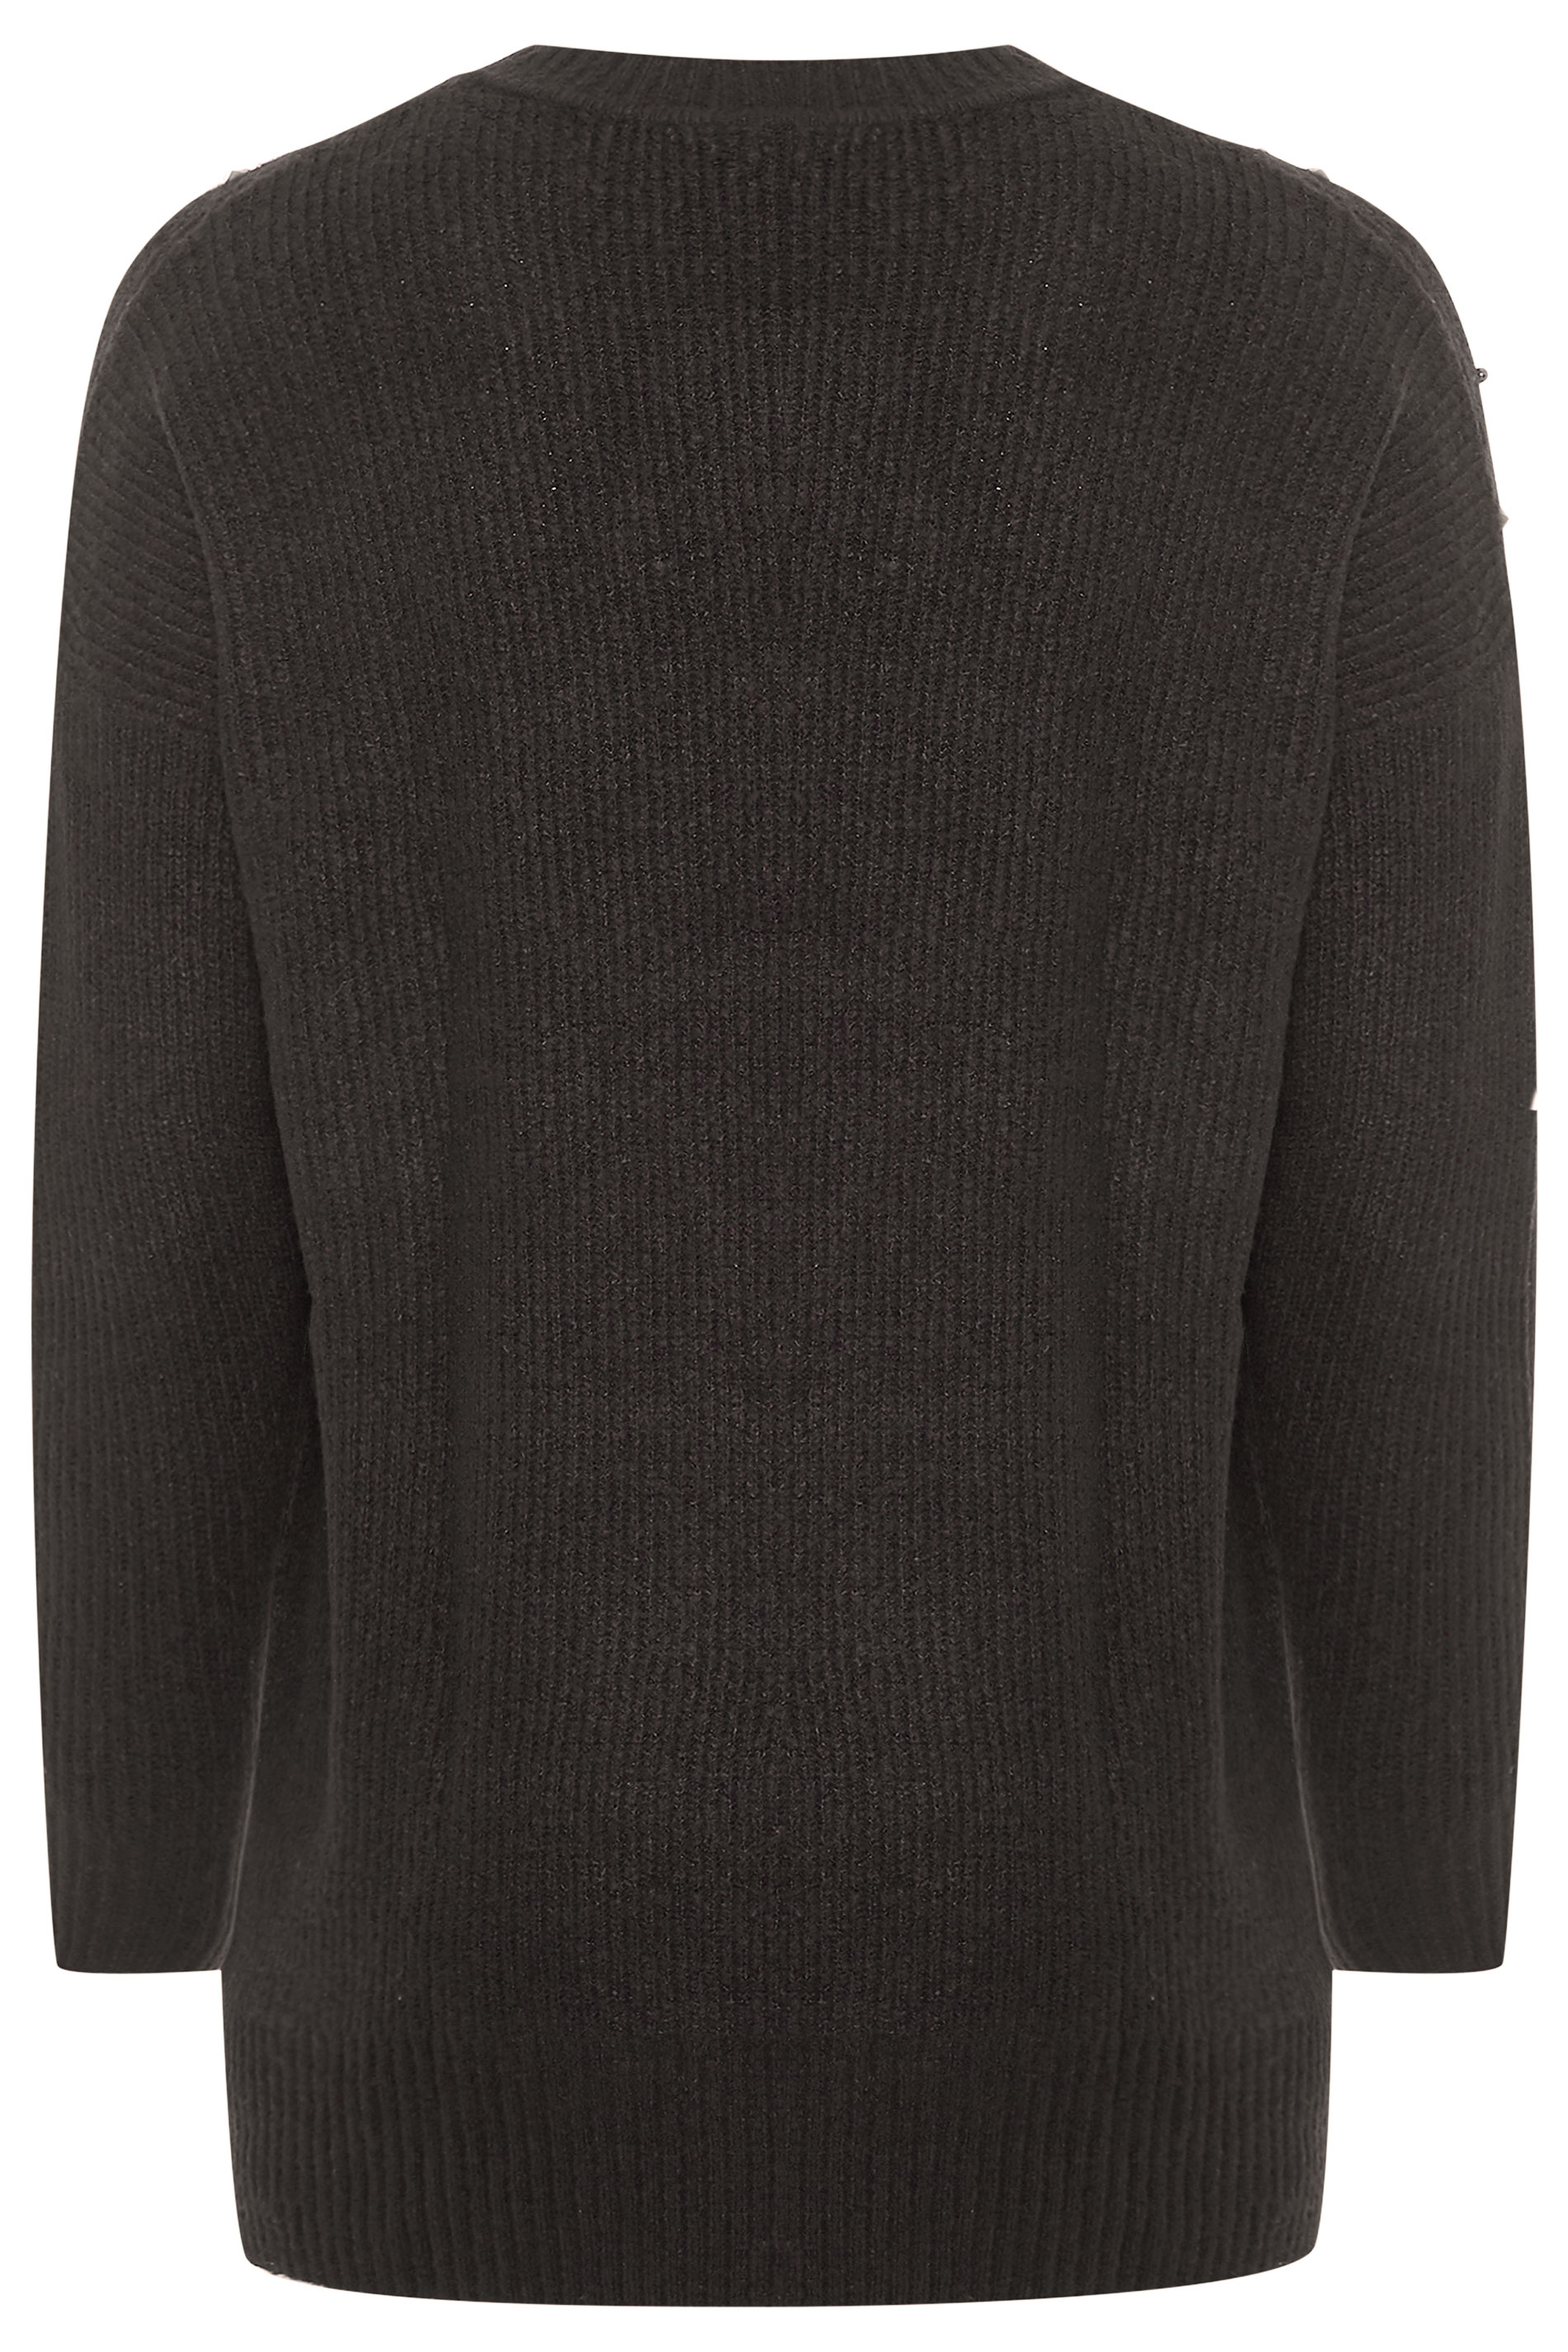 Black Studded Chevron Knitted Jumper | Yours Clothing